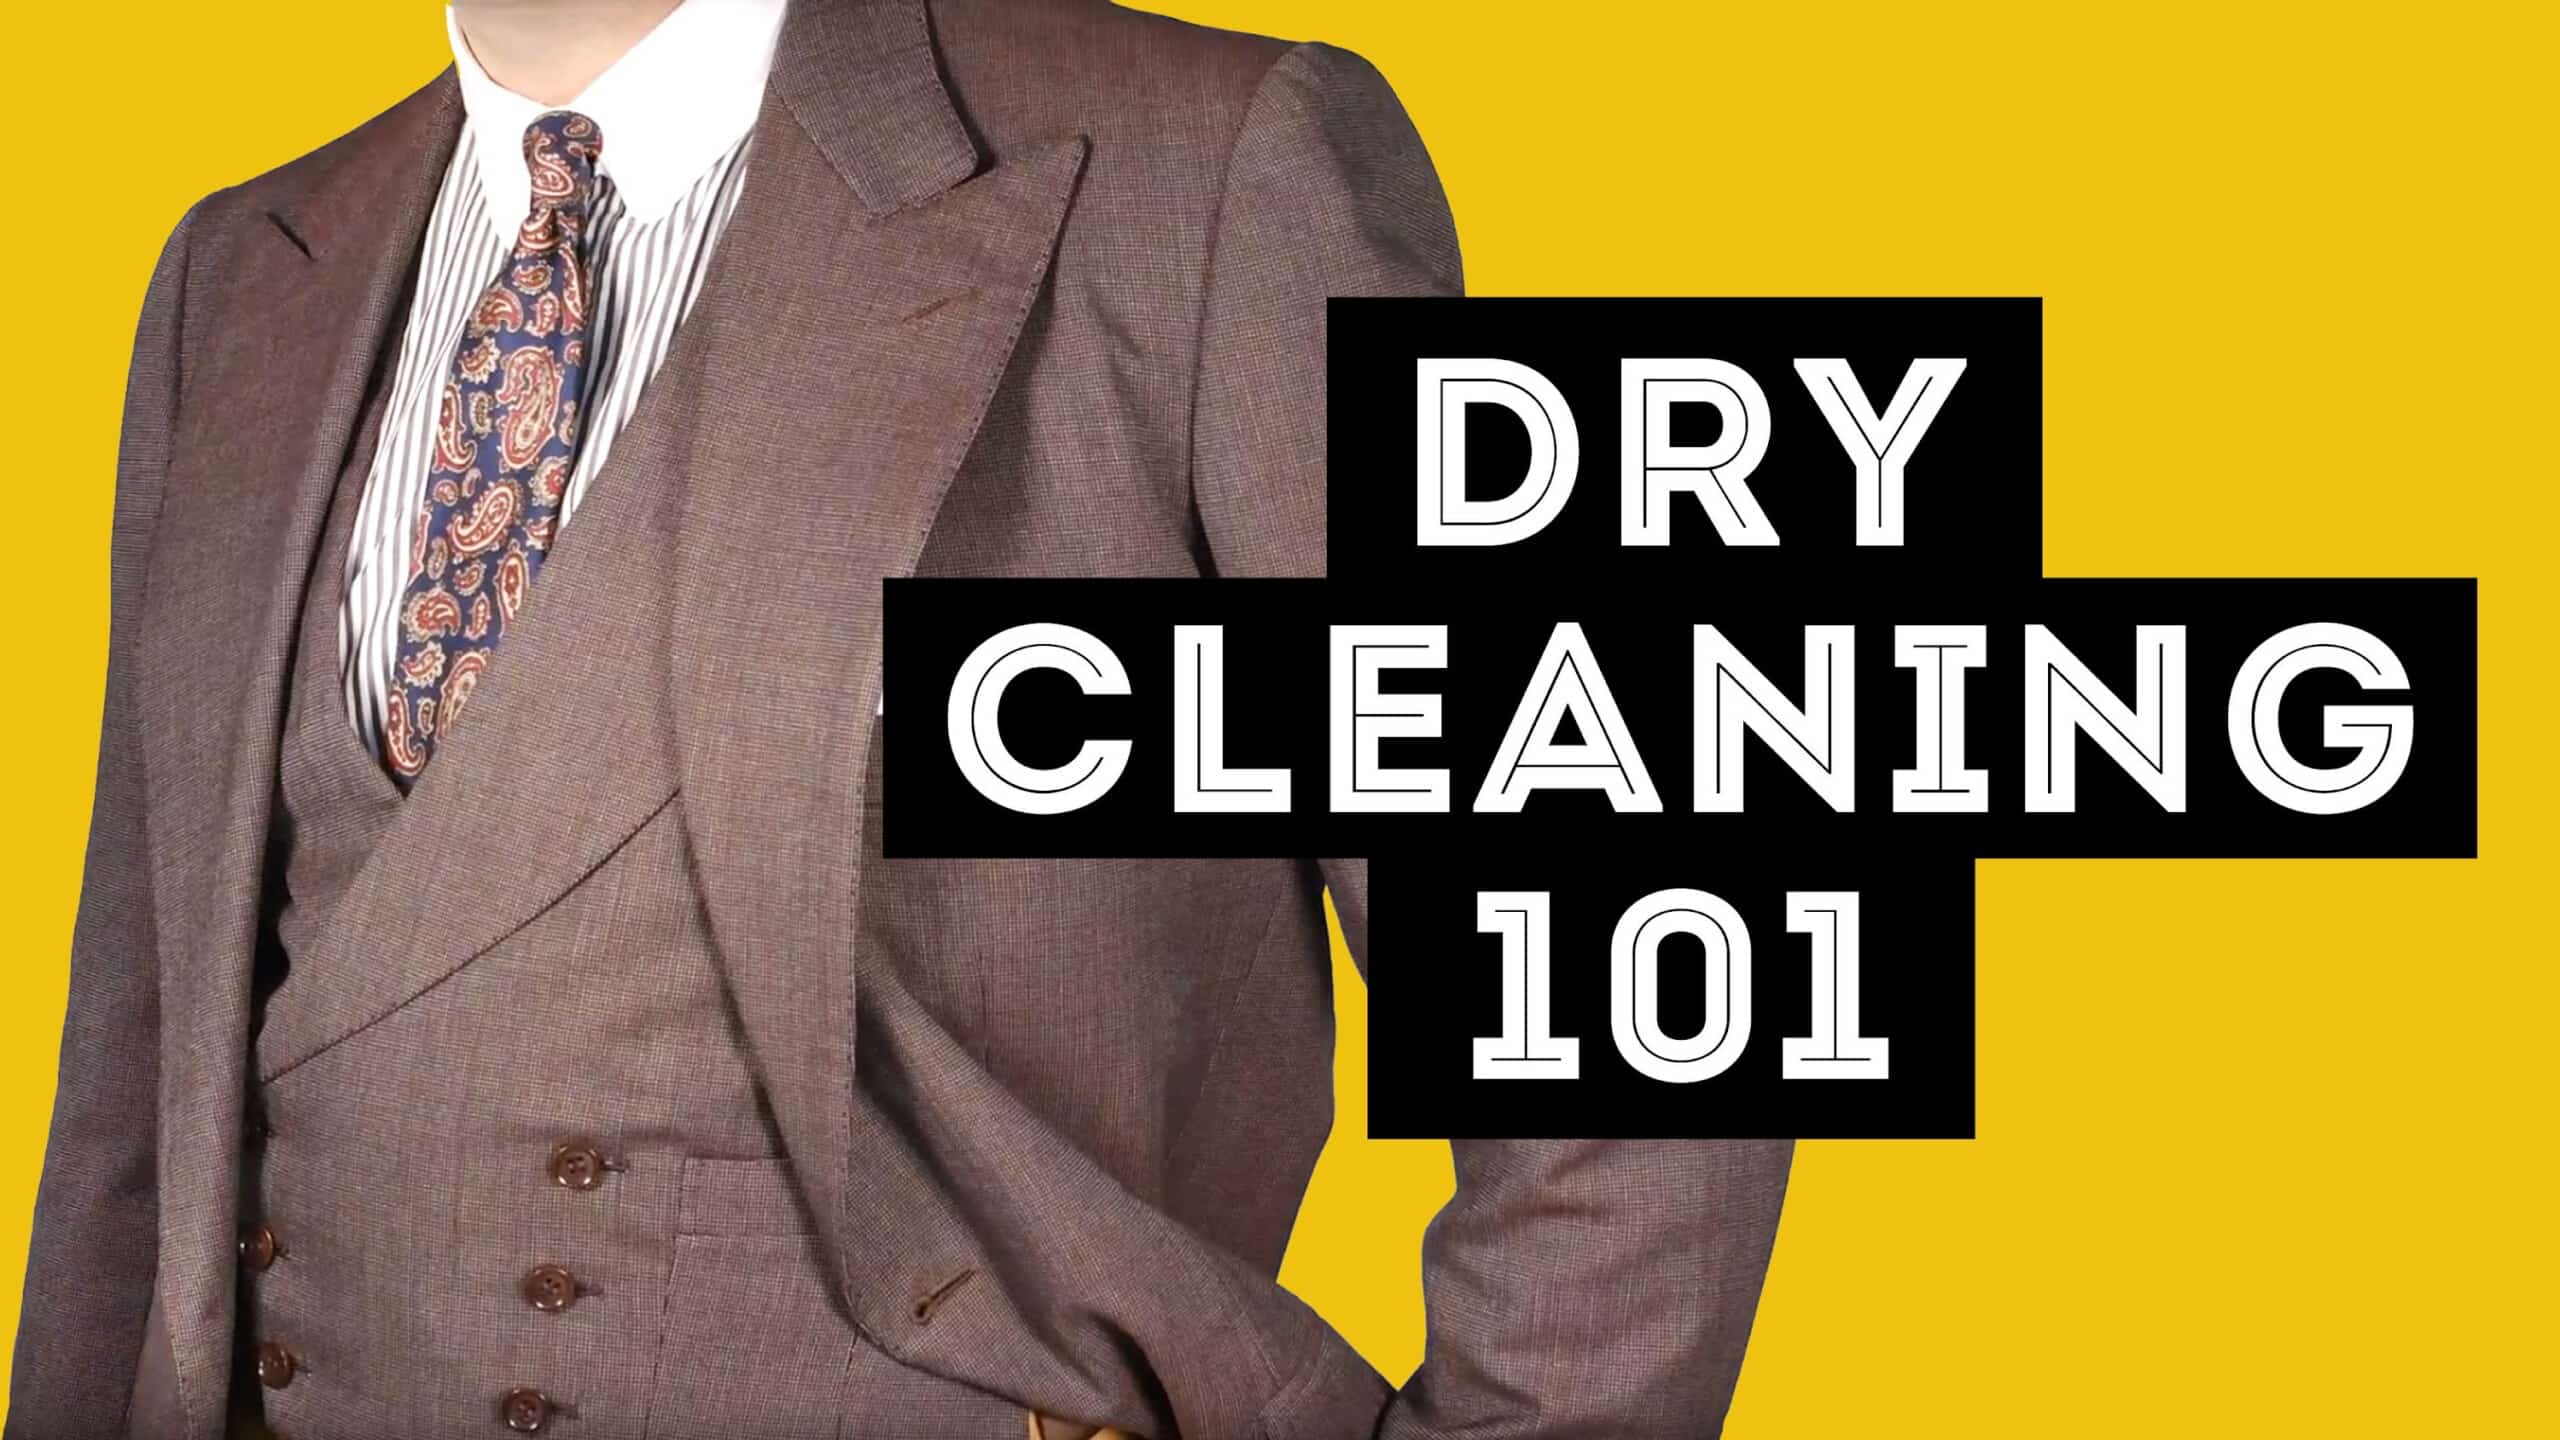 How to Wash Your Button-Down Shirts at Home (Without Ruining Them